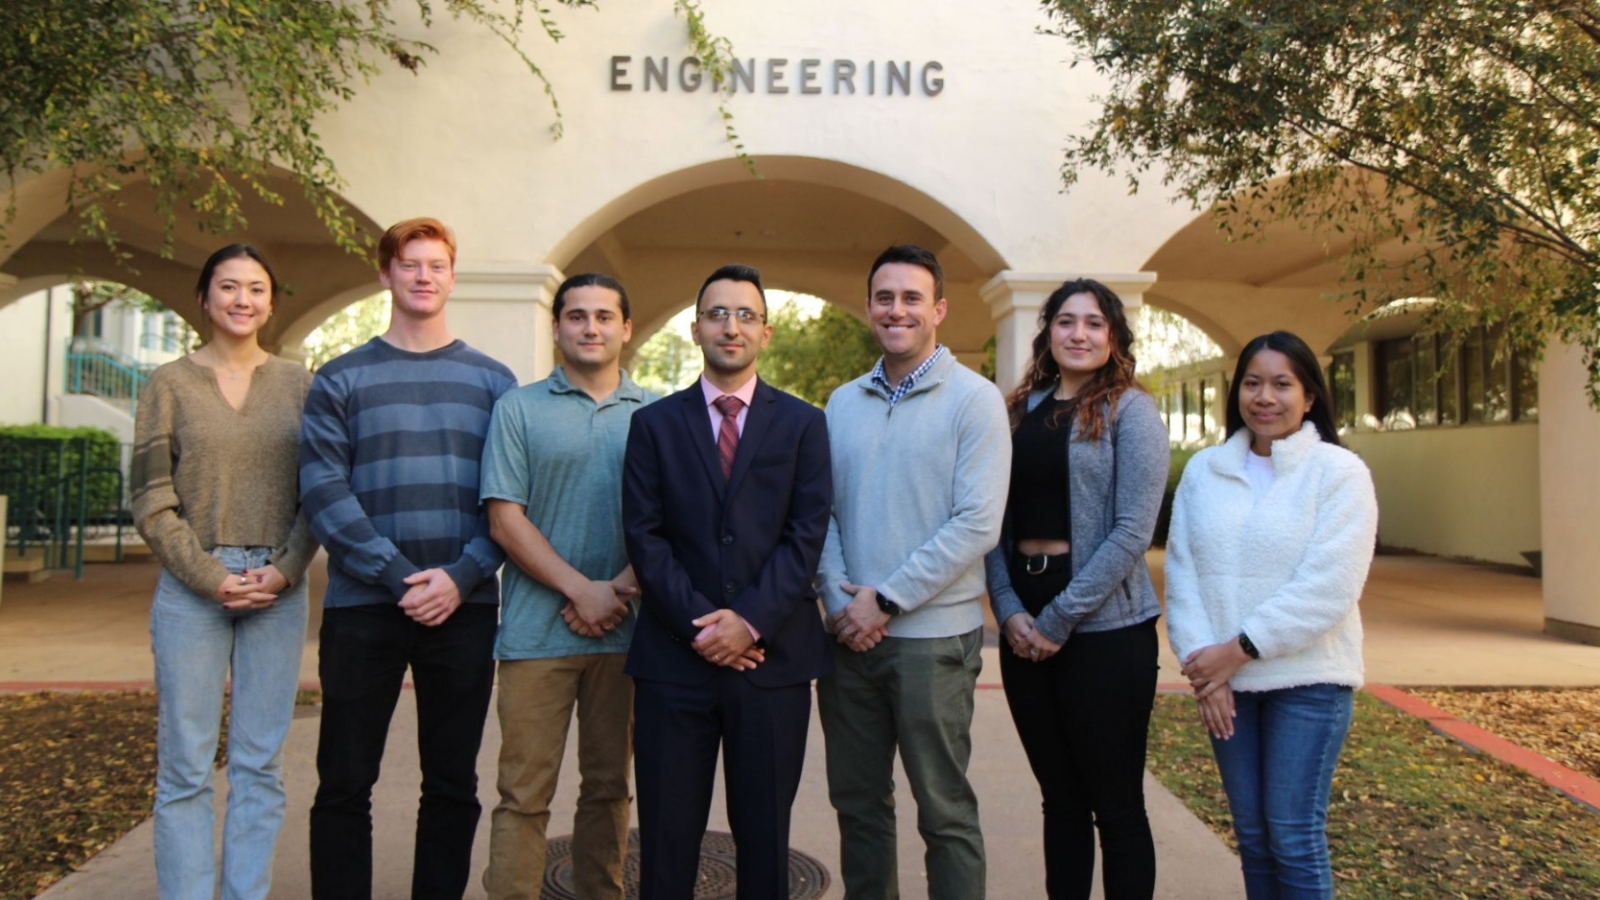 Hassan Davani (center) poses with his team of Urban Water Lab student researchers.